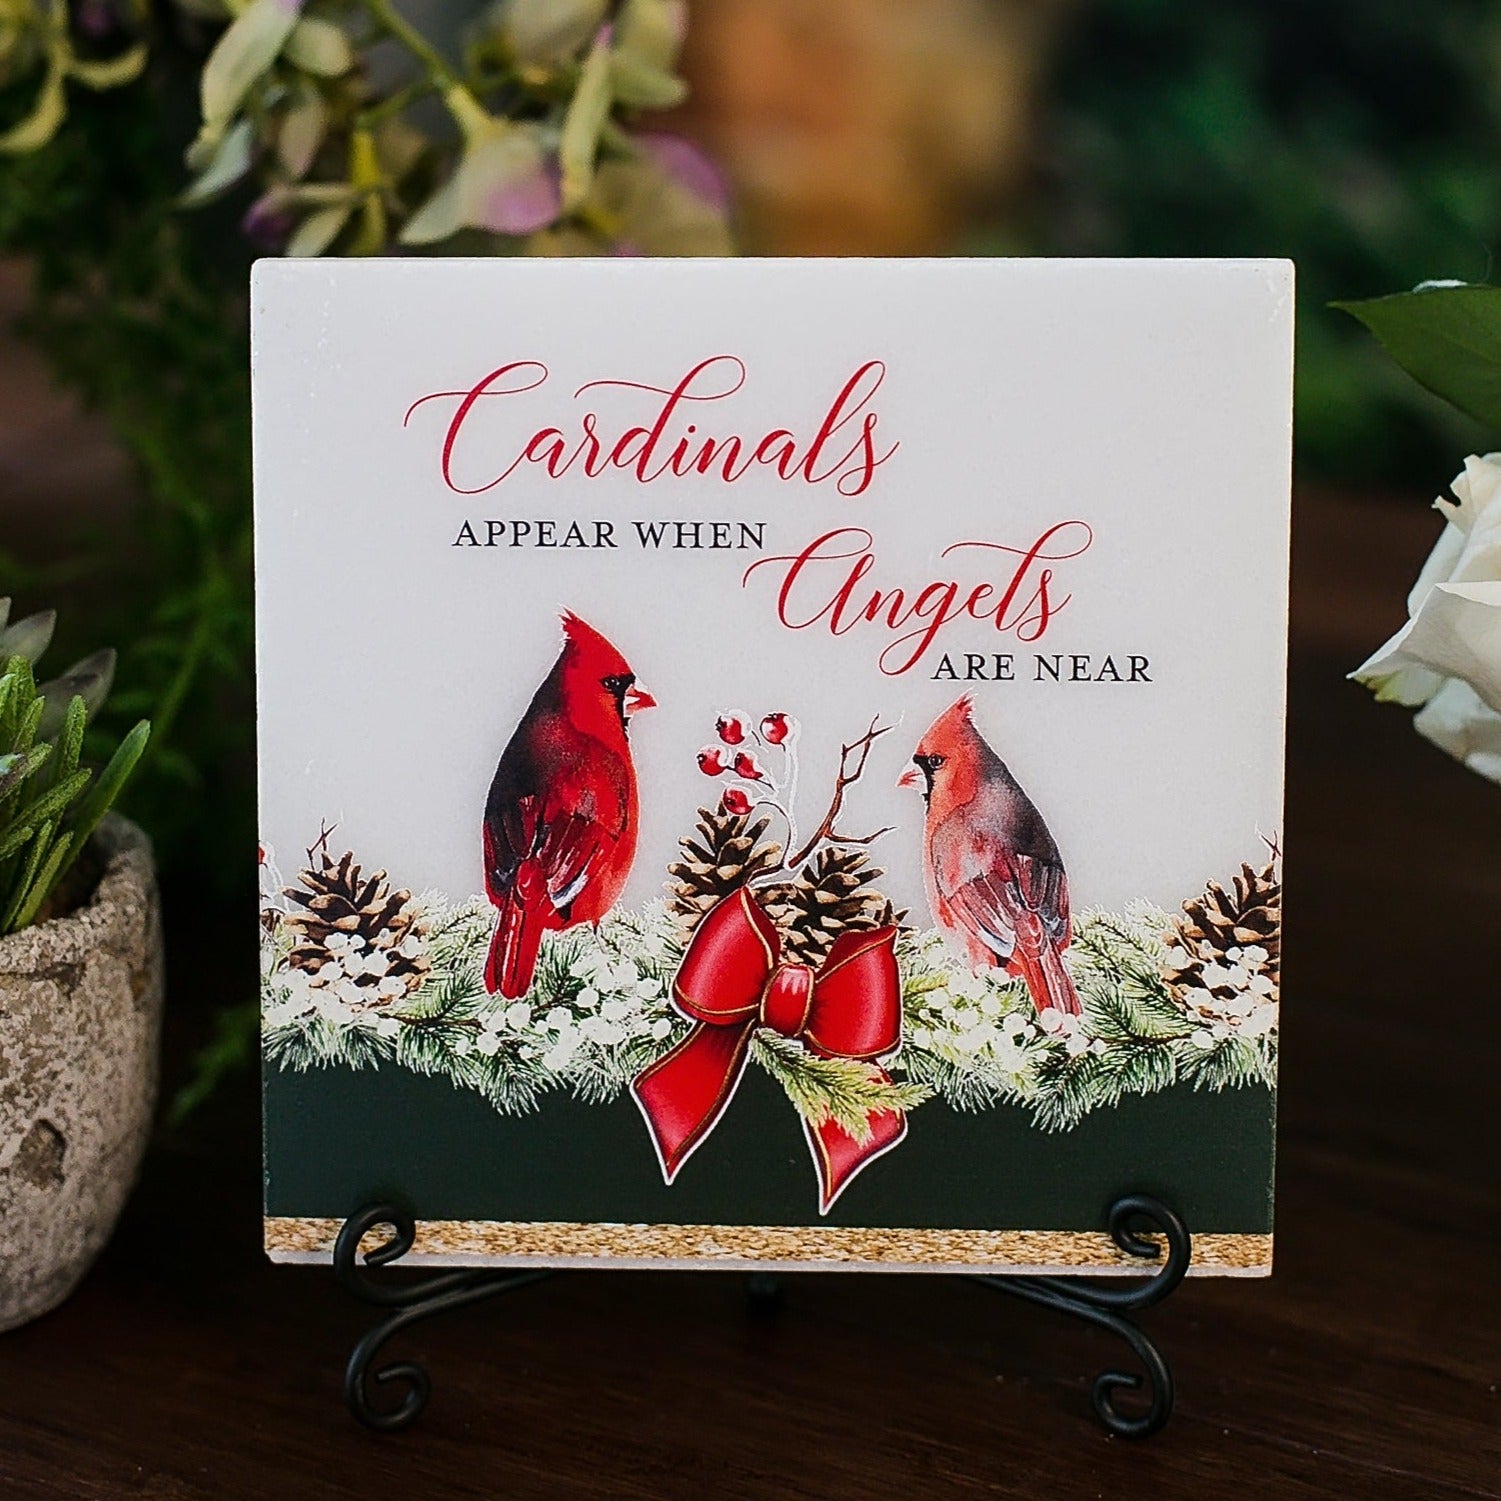 Cardinals Appear When Angels Are Near Tile Plaque